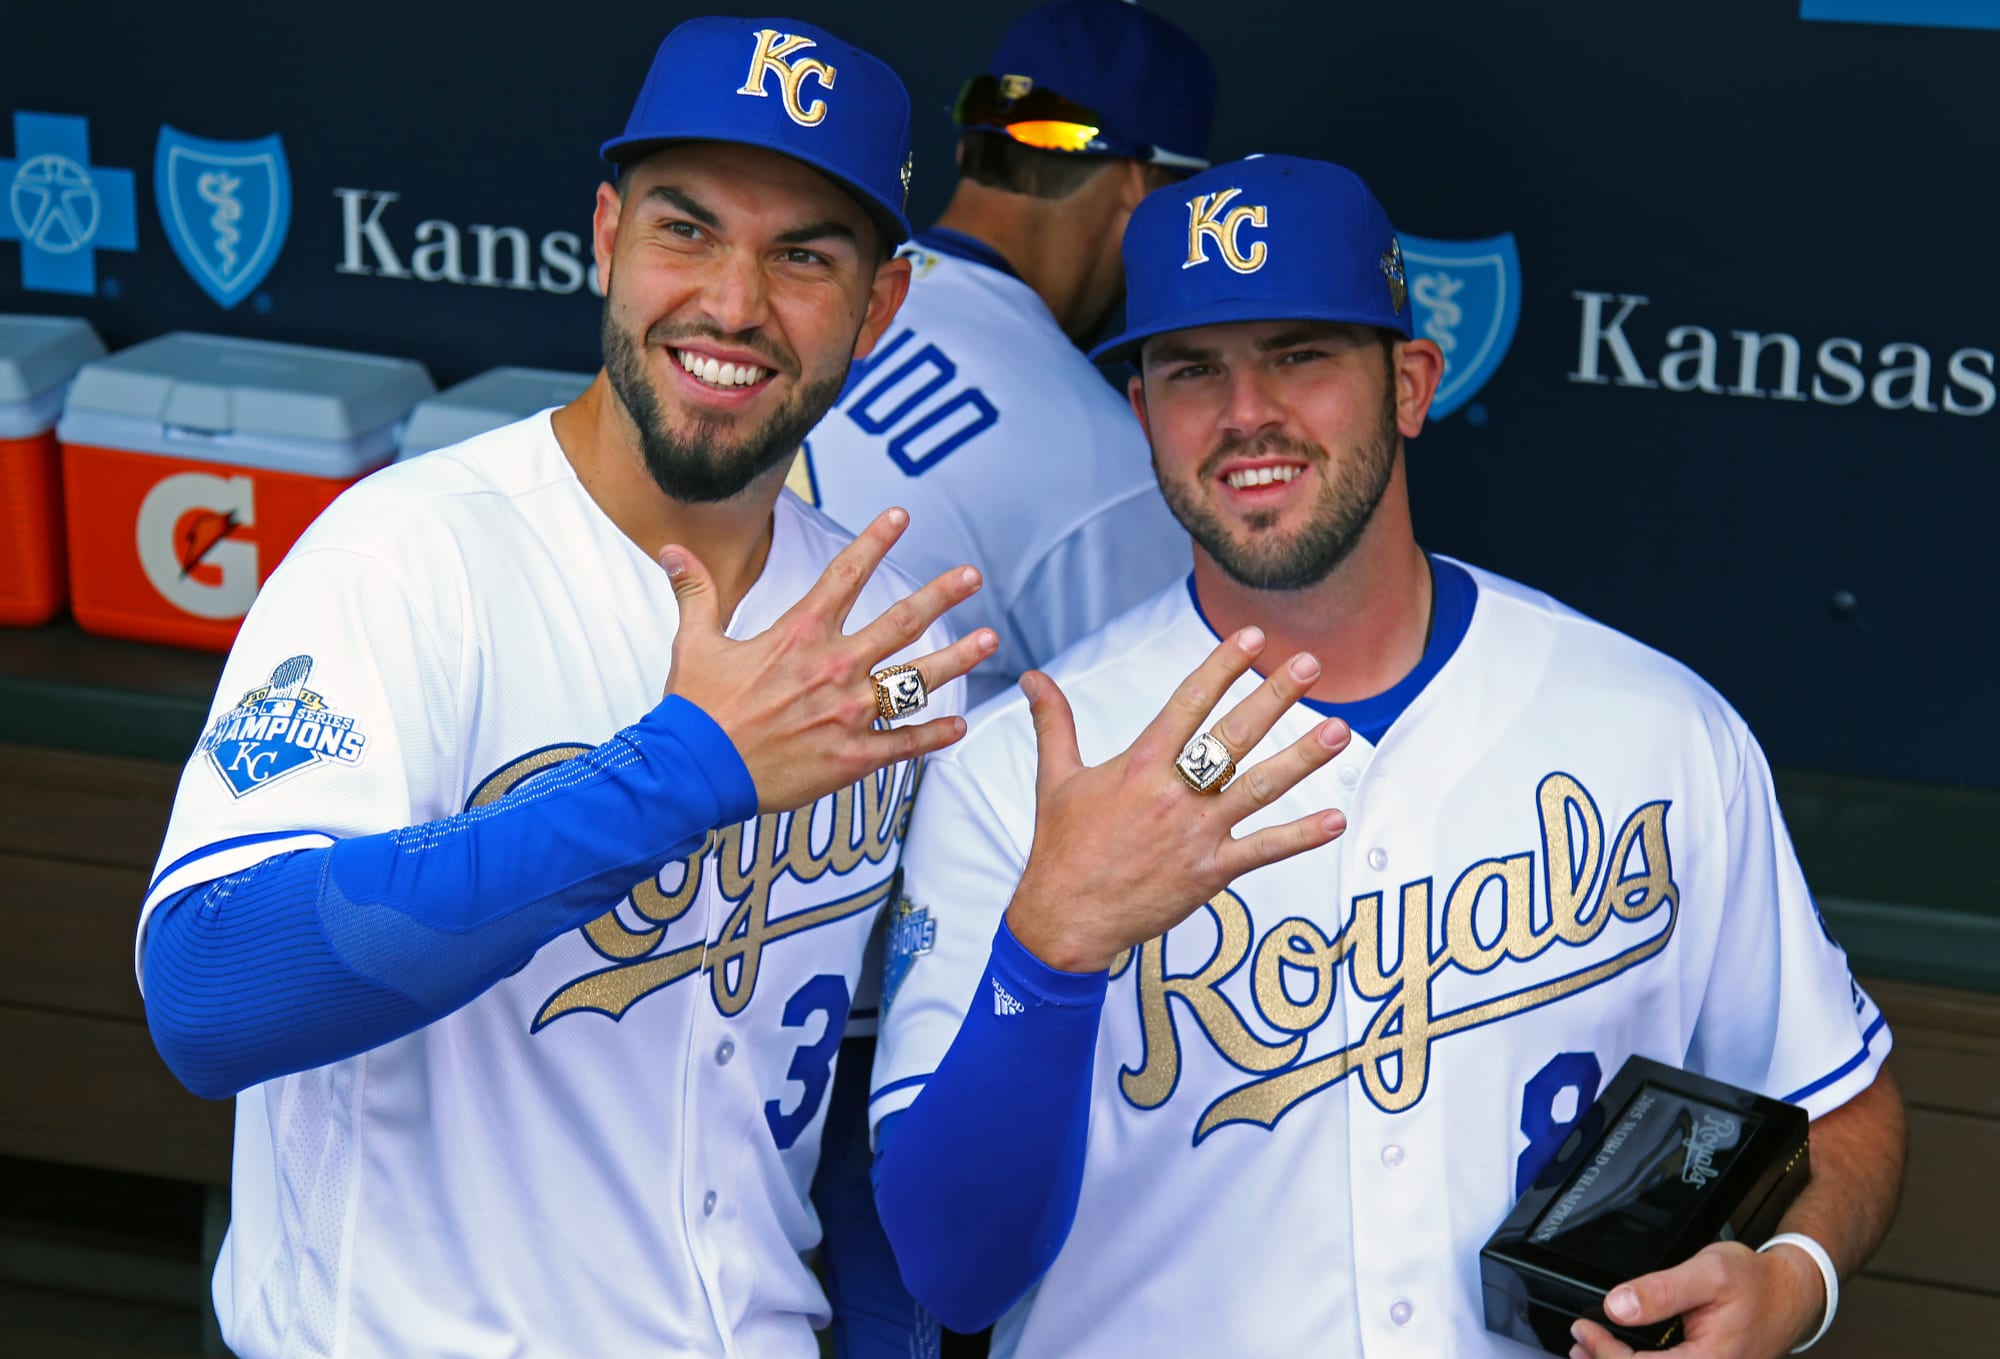 Are the Royals really going to land Hosmer and Moustakas? - Royals